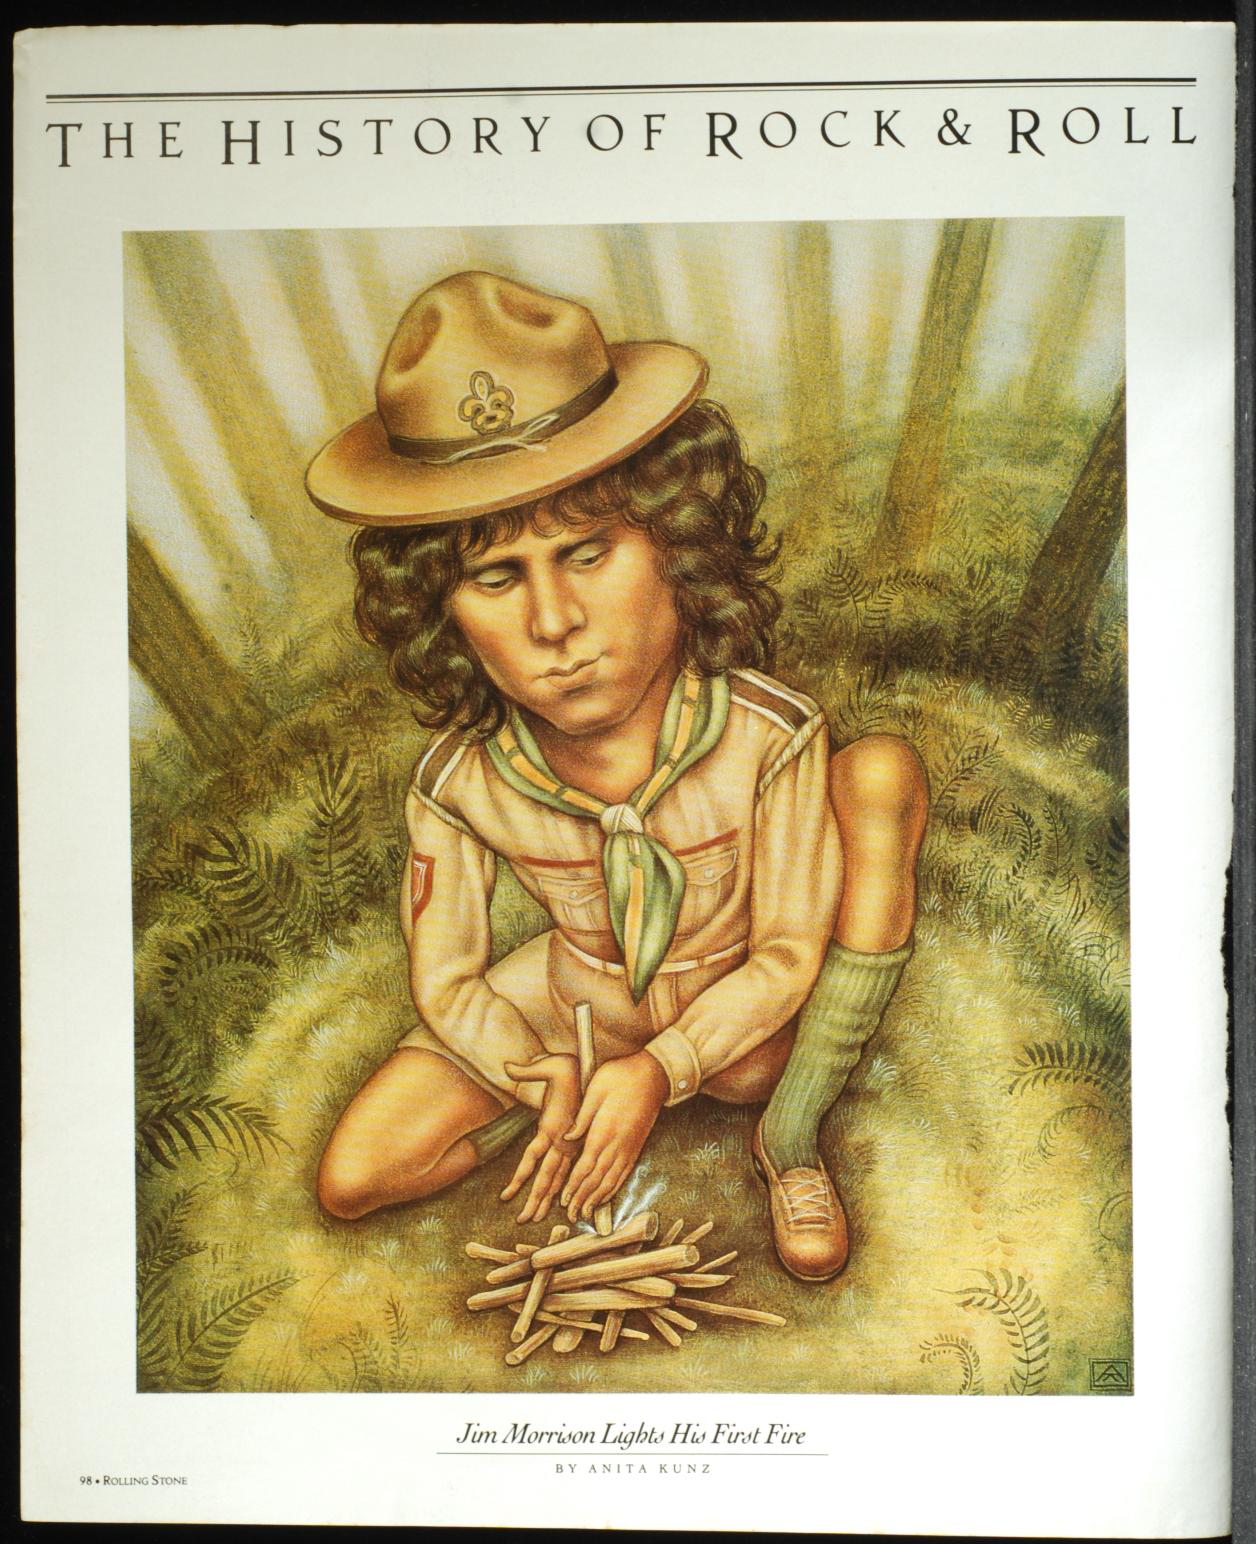 mbb005214b_-_Keir_Phillip_-_Rolling_Stone_Issue_456_April_1991_-_Contains_Illustrations.jpg